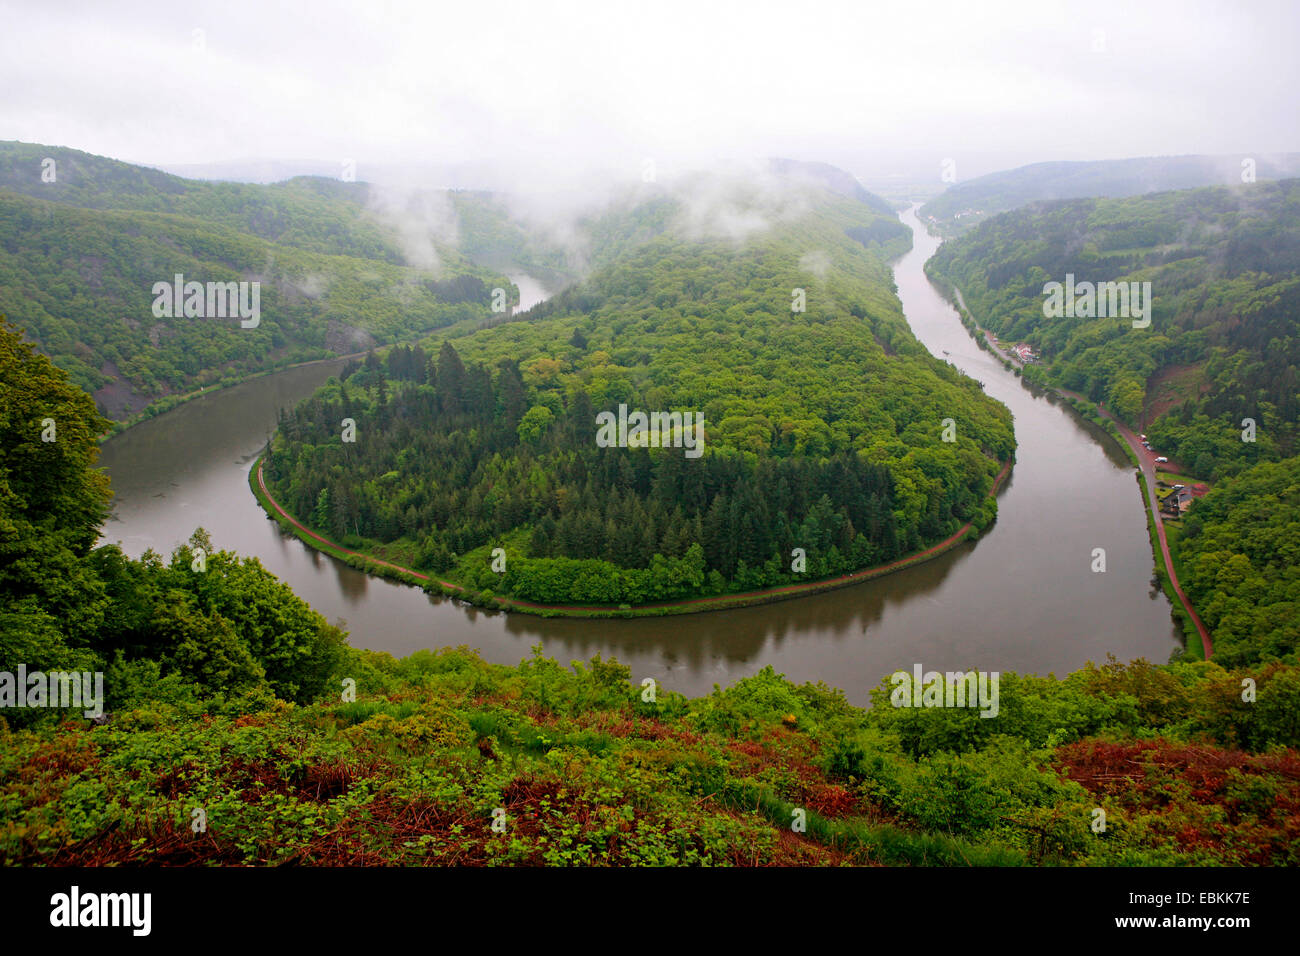 view from Cloef to Saar river band at Mettlach, Germany, Saarland, Cloef, Mettlach Stock Photo